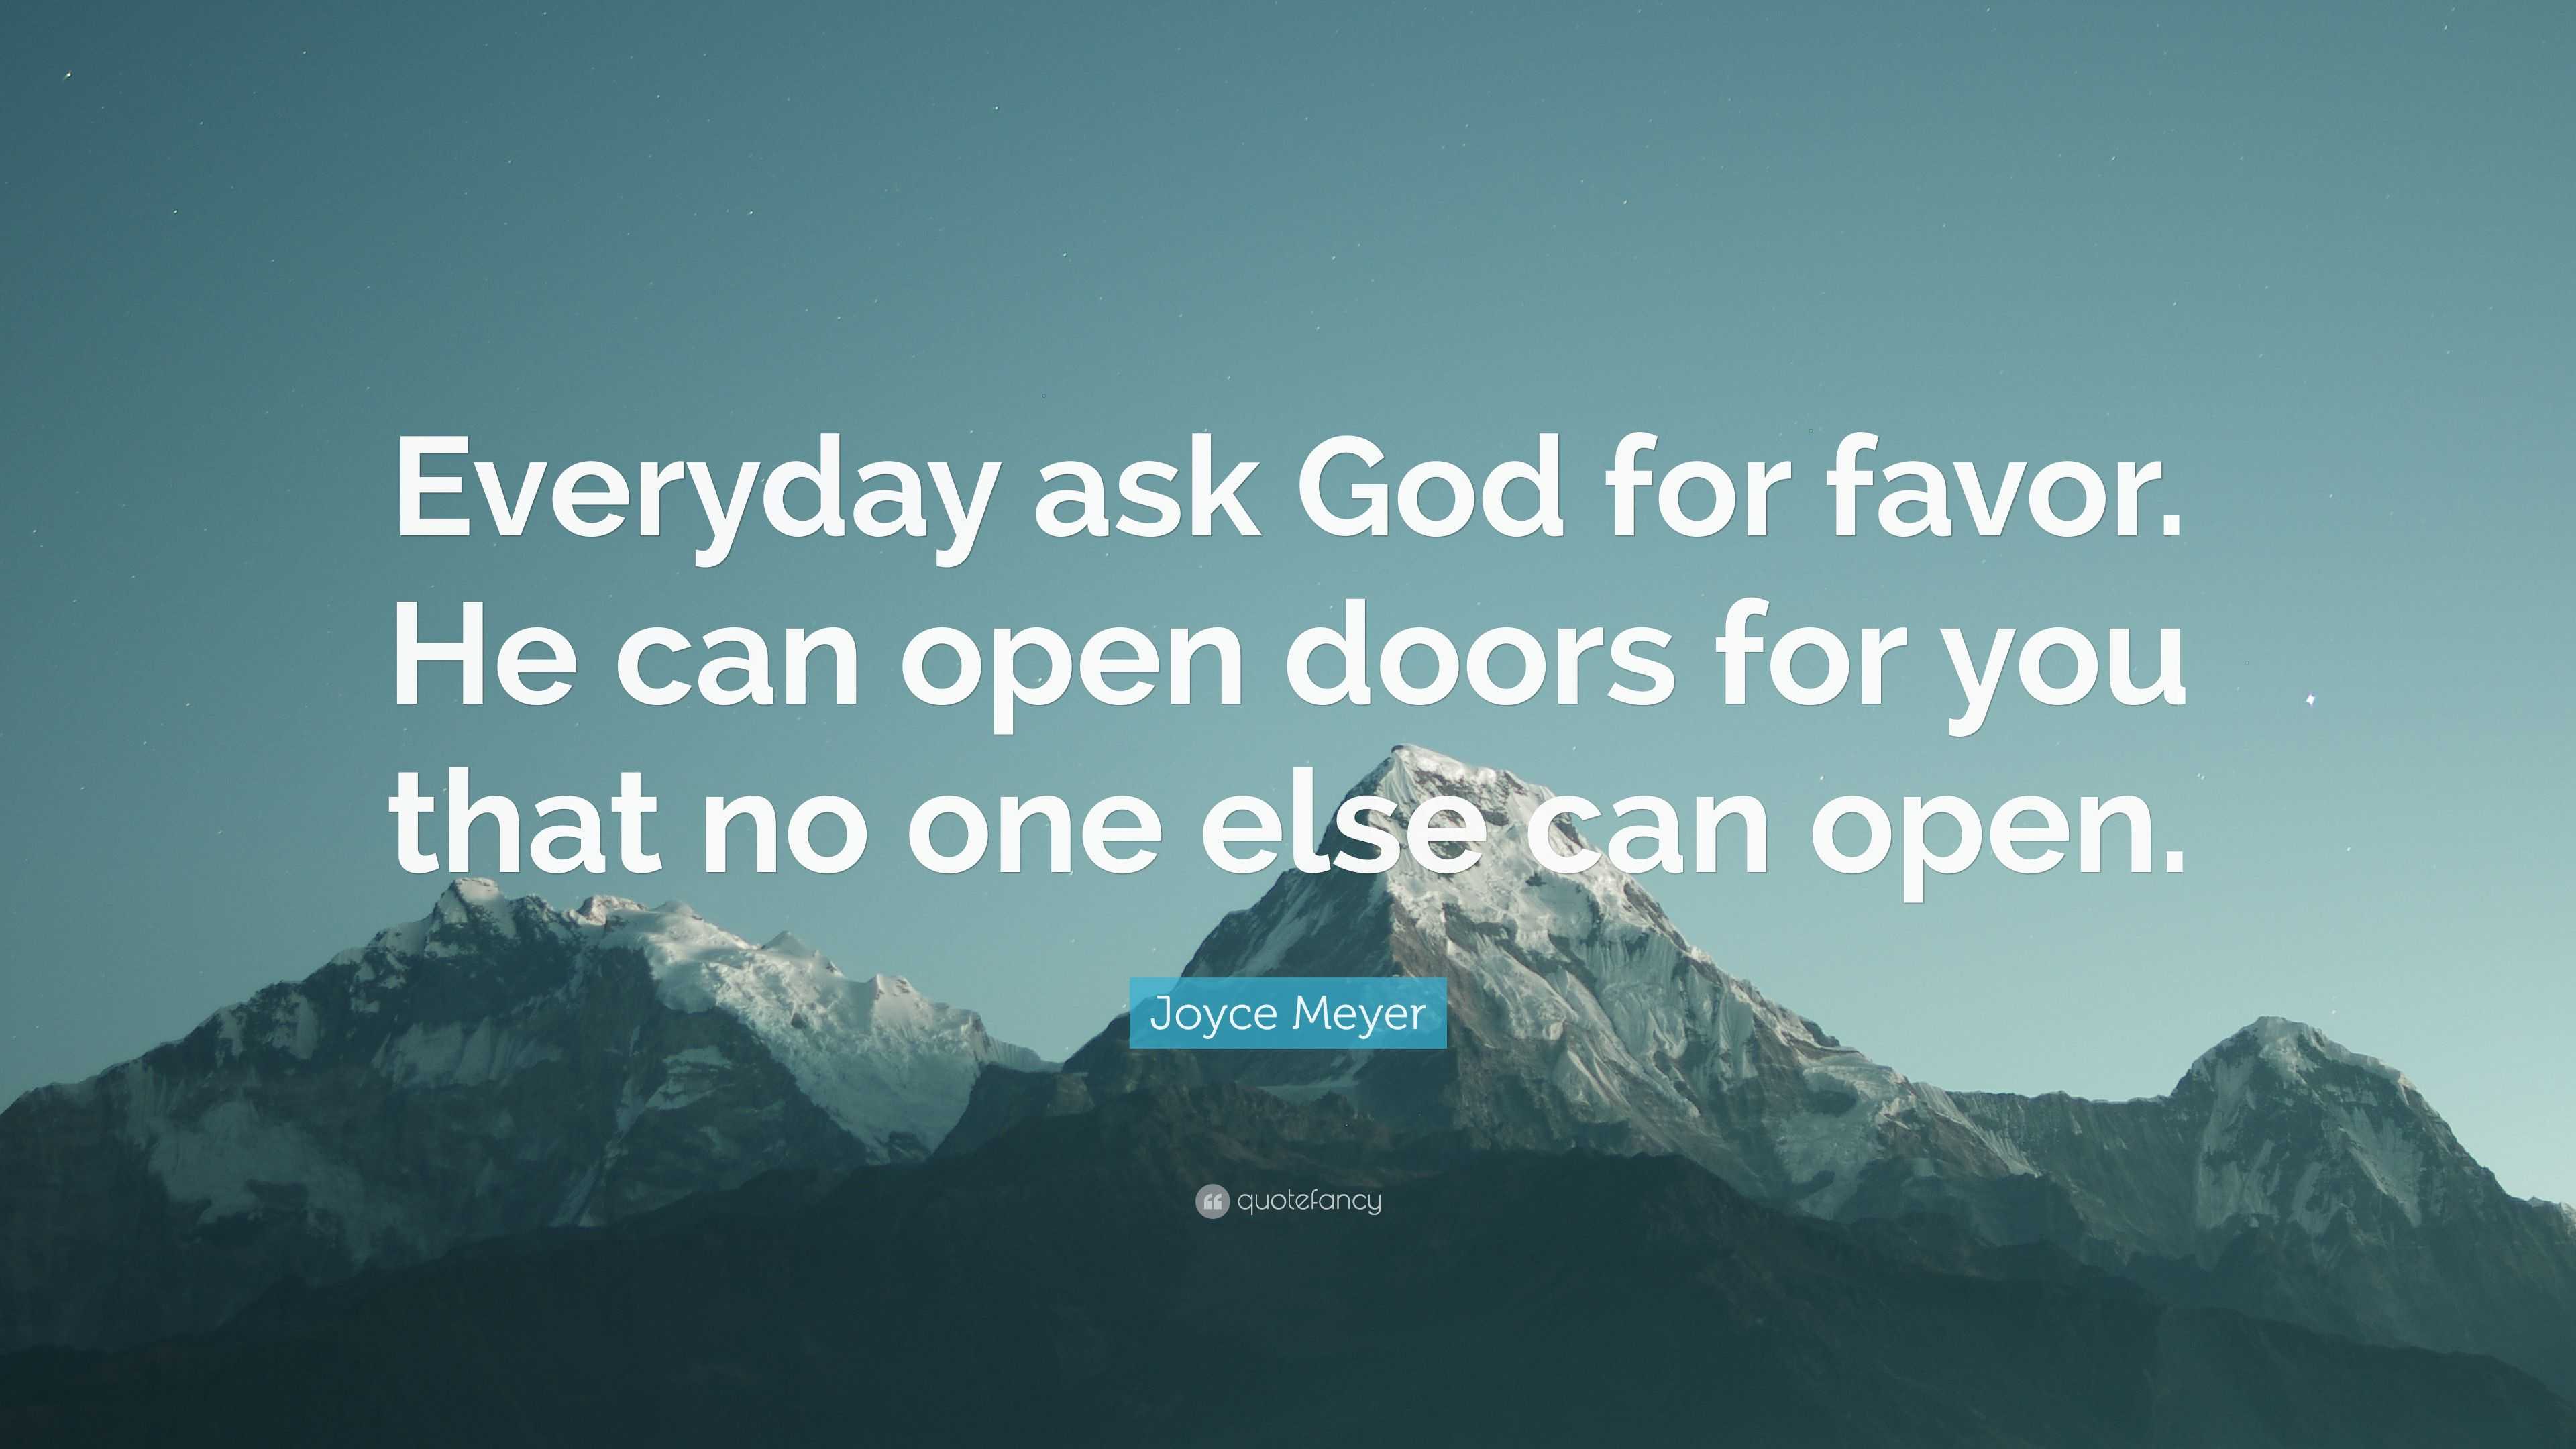 Joyce Meyer Quote: “Everyday ask God for favor. He can open doors for ...